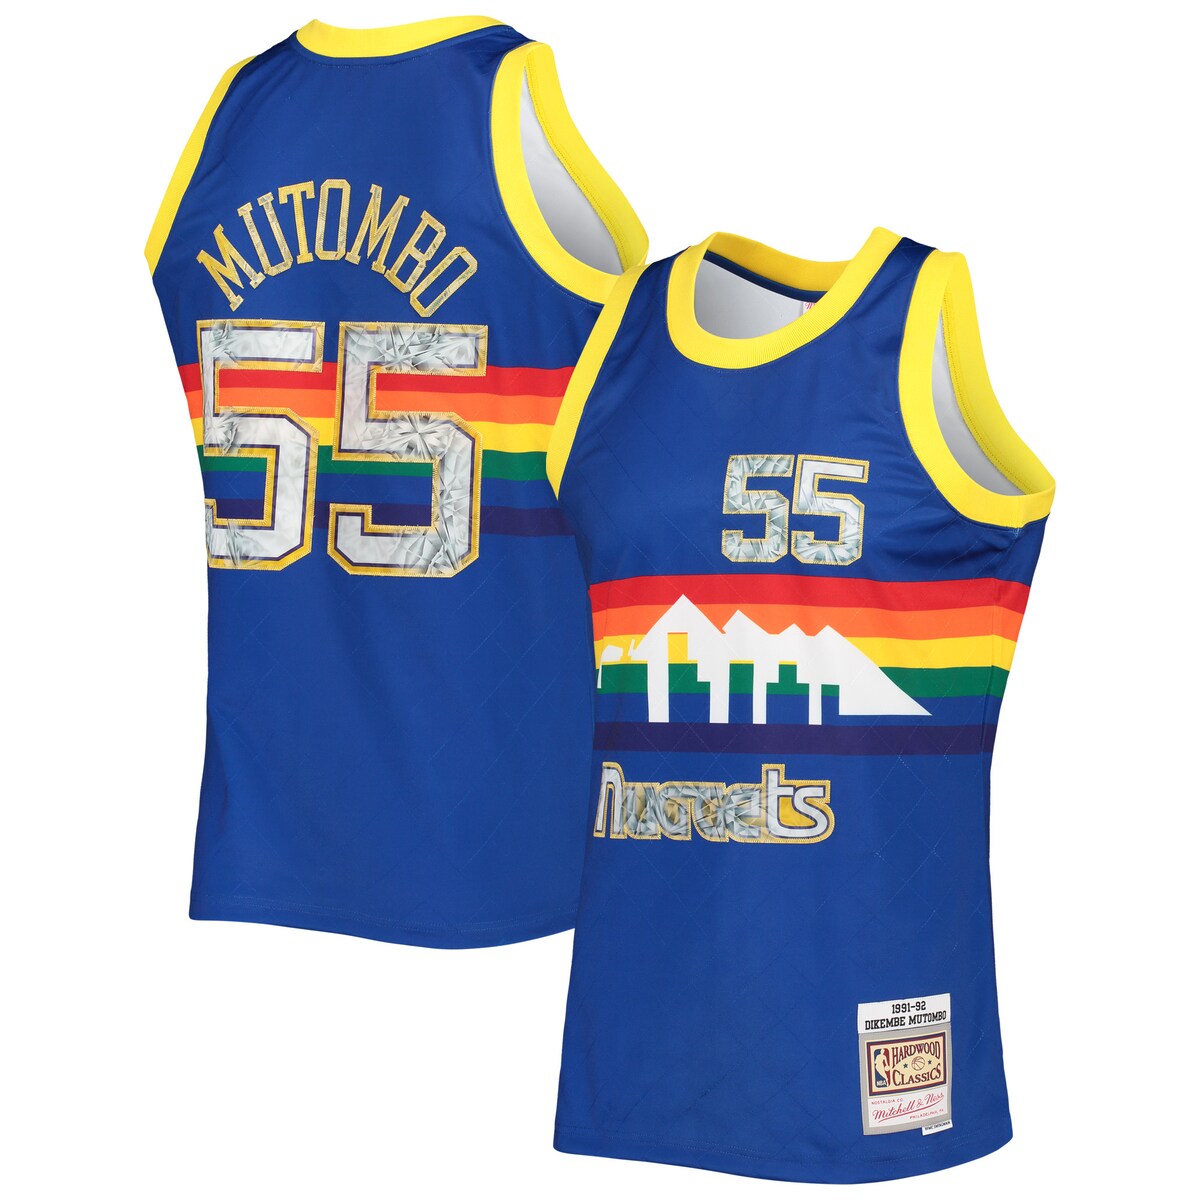 For the NBA's 75th anniversary, throw it back to one of the stars of the Denver Nuggets with this 1996/97 Dikembe Mutombo Hardwood Classics Diamond Swingman jersey from Mitchell & Ness. It features faux diamond details for the league's big milestone and that old-school design Dikembe Mutombo used to wear back in the day. This authentic piece of gear is a great way to mesh past and present as you get fired up for game day.Officially licensedStitched holographic applique with faux diamond patternSwingman ThrowbackImportedSleevelessMaterial: 100% PolyesterWoven jock tag at hemMachine wash, line dryStitched designBrand: Mitchell & NessSide splits at waist hem